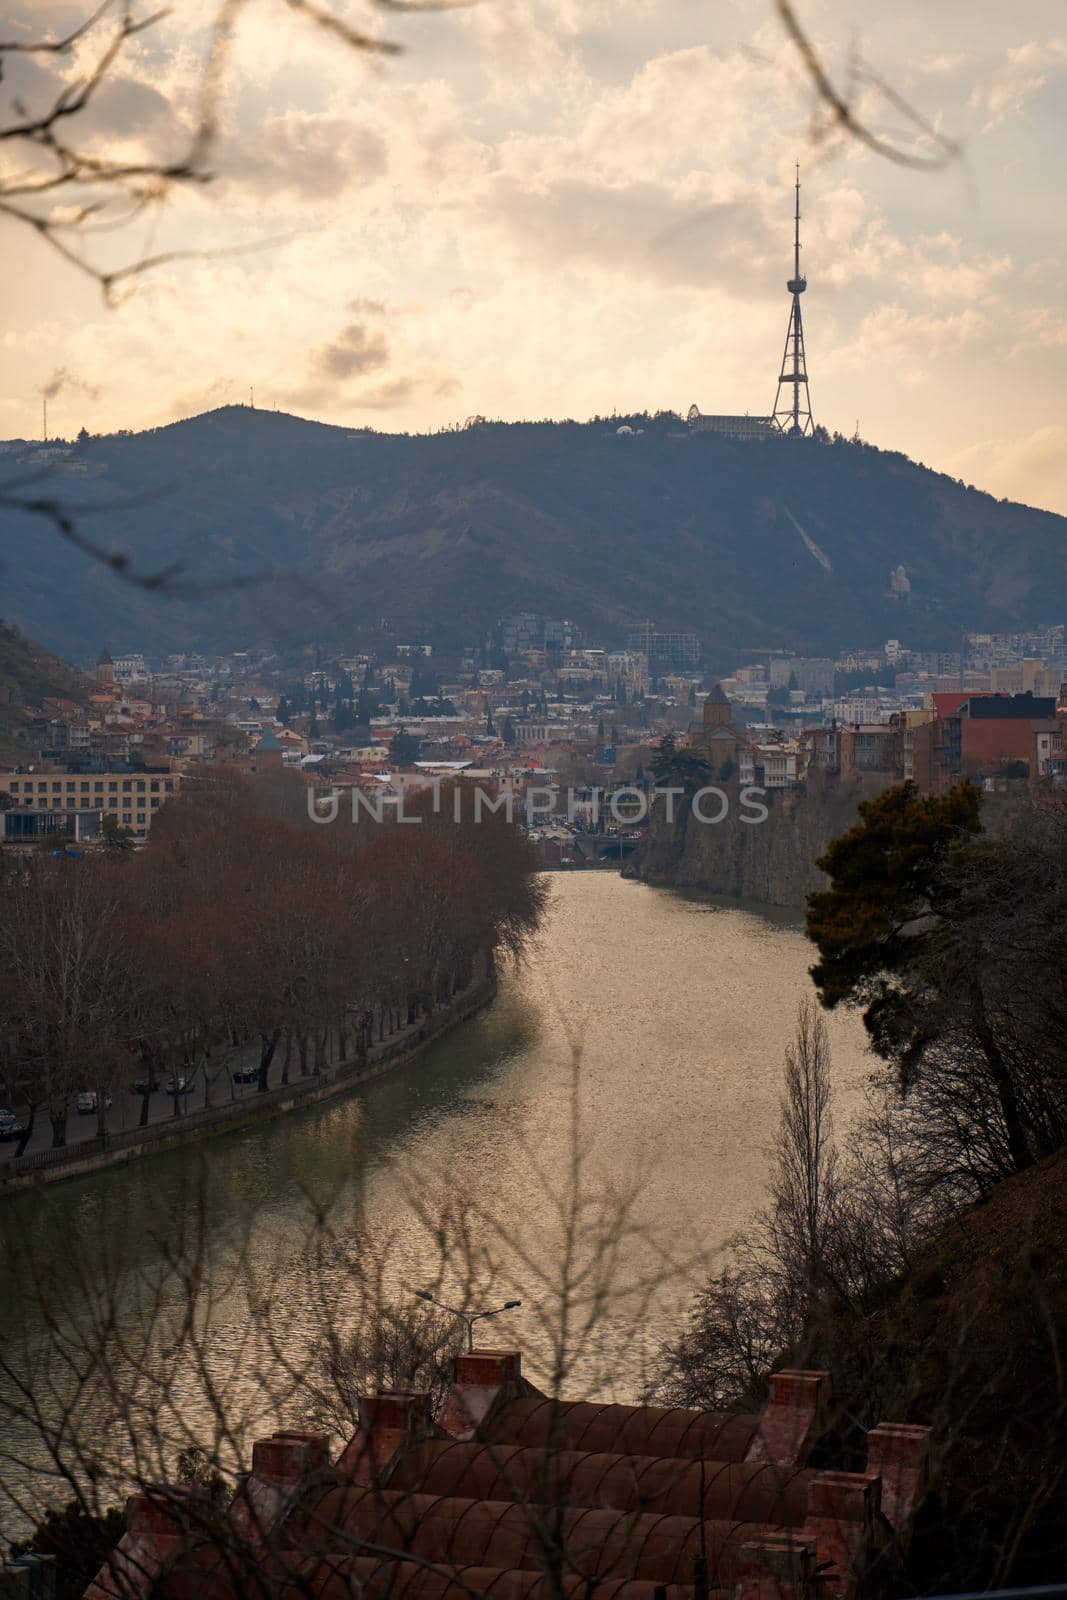 The Kura River flows through the city of Tbilisi. City landscape by Try_my_best